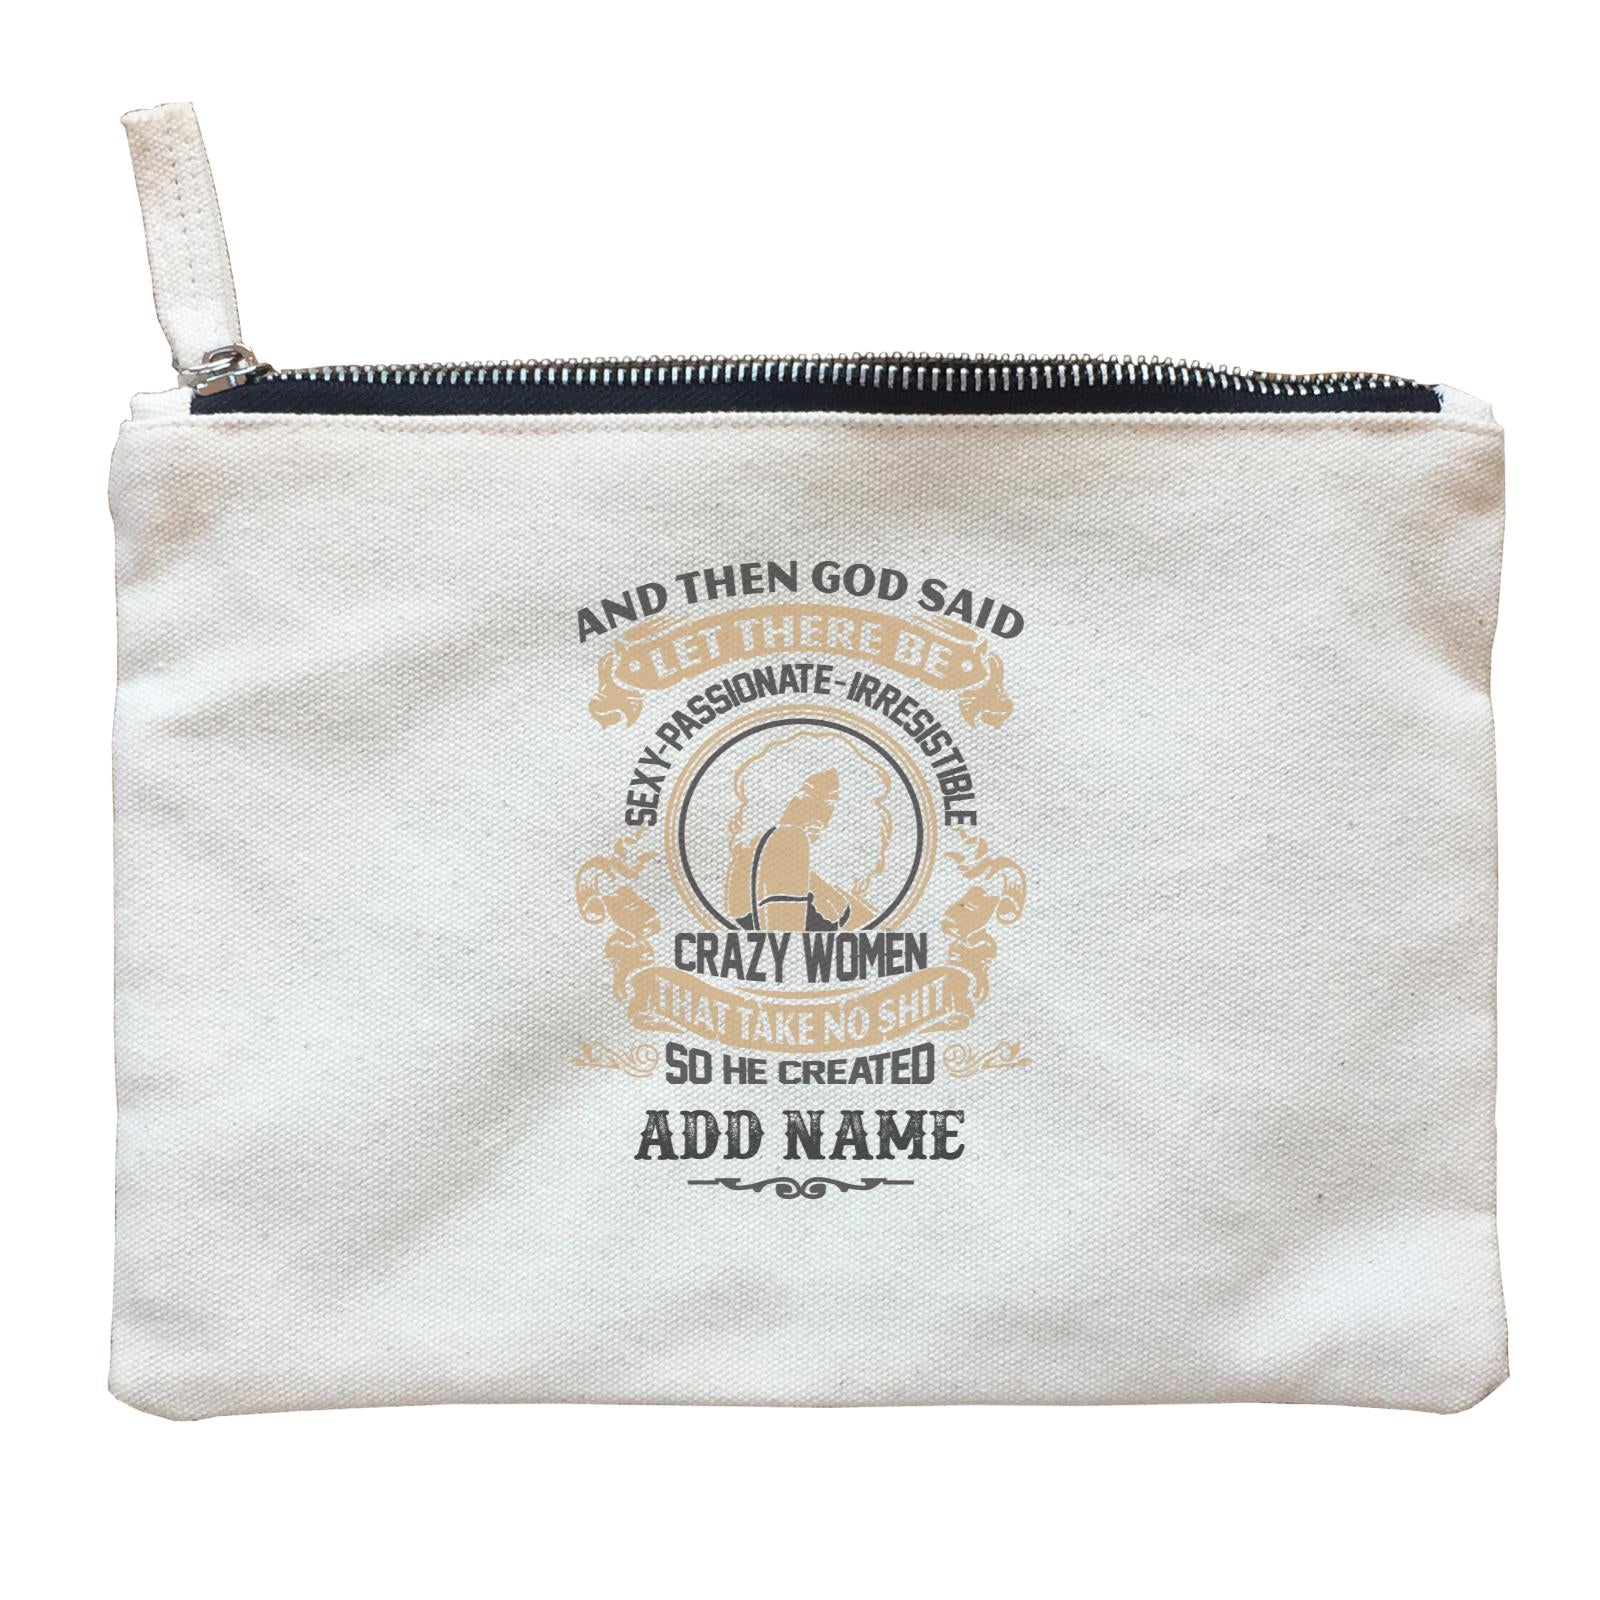 Personalize It Awesome And Then God Said Sexy Passionate Irresistible Addname Zipper Pouch